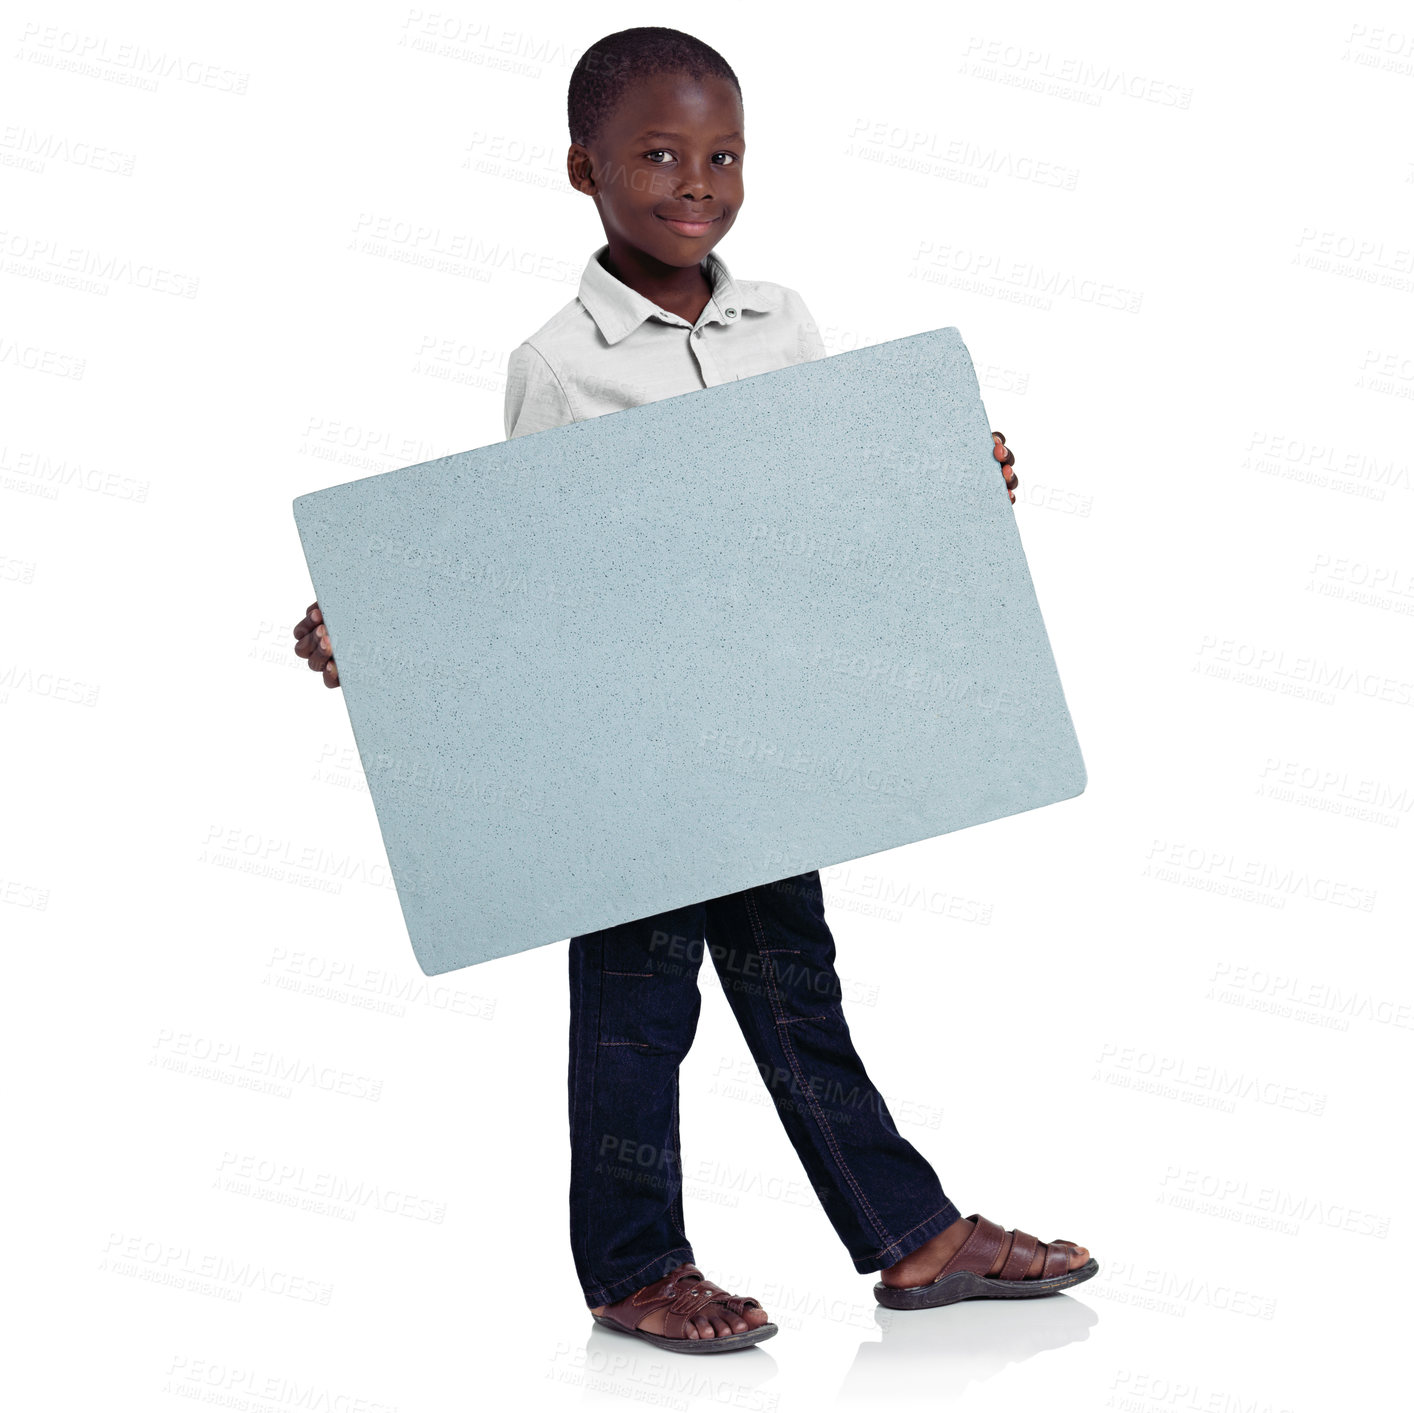 Buy stock photo Full length studio shot of a young african girl holding a blank board